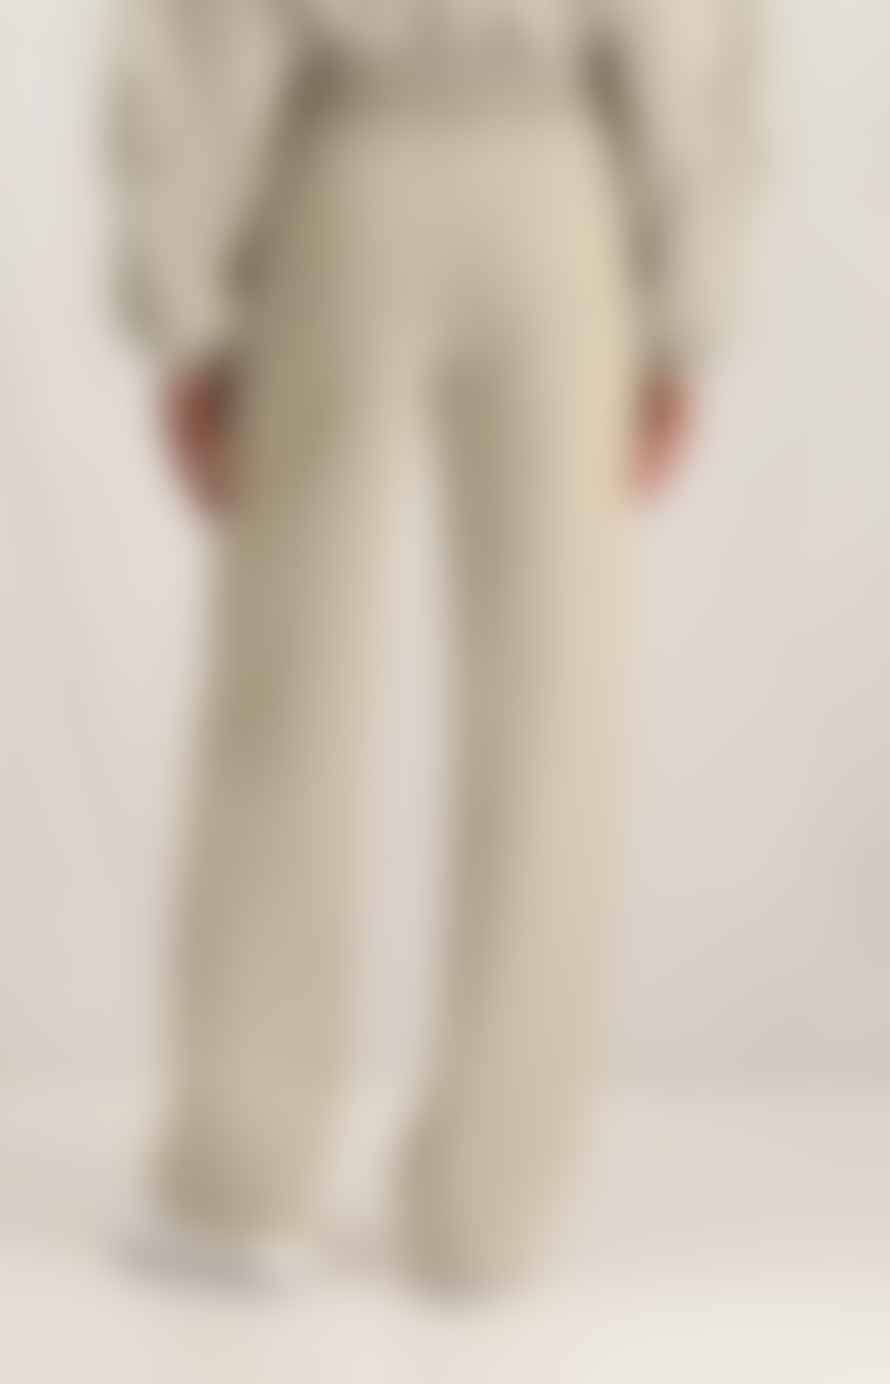 Yaya Jersey Wide Leg Trousers With Elastic Waist And Seam Details | White Pepper Beige